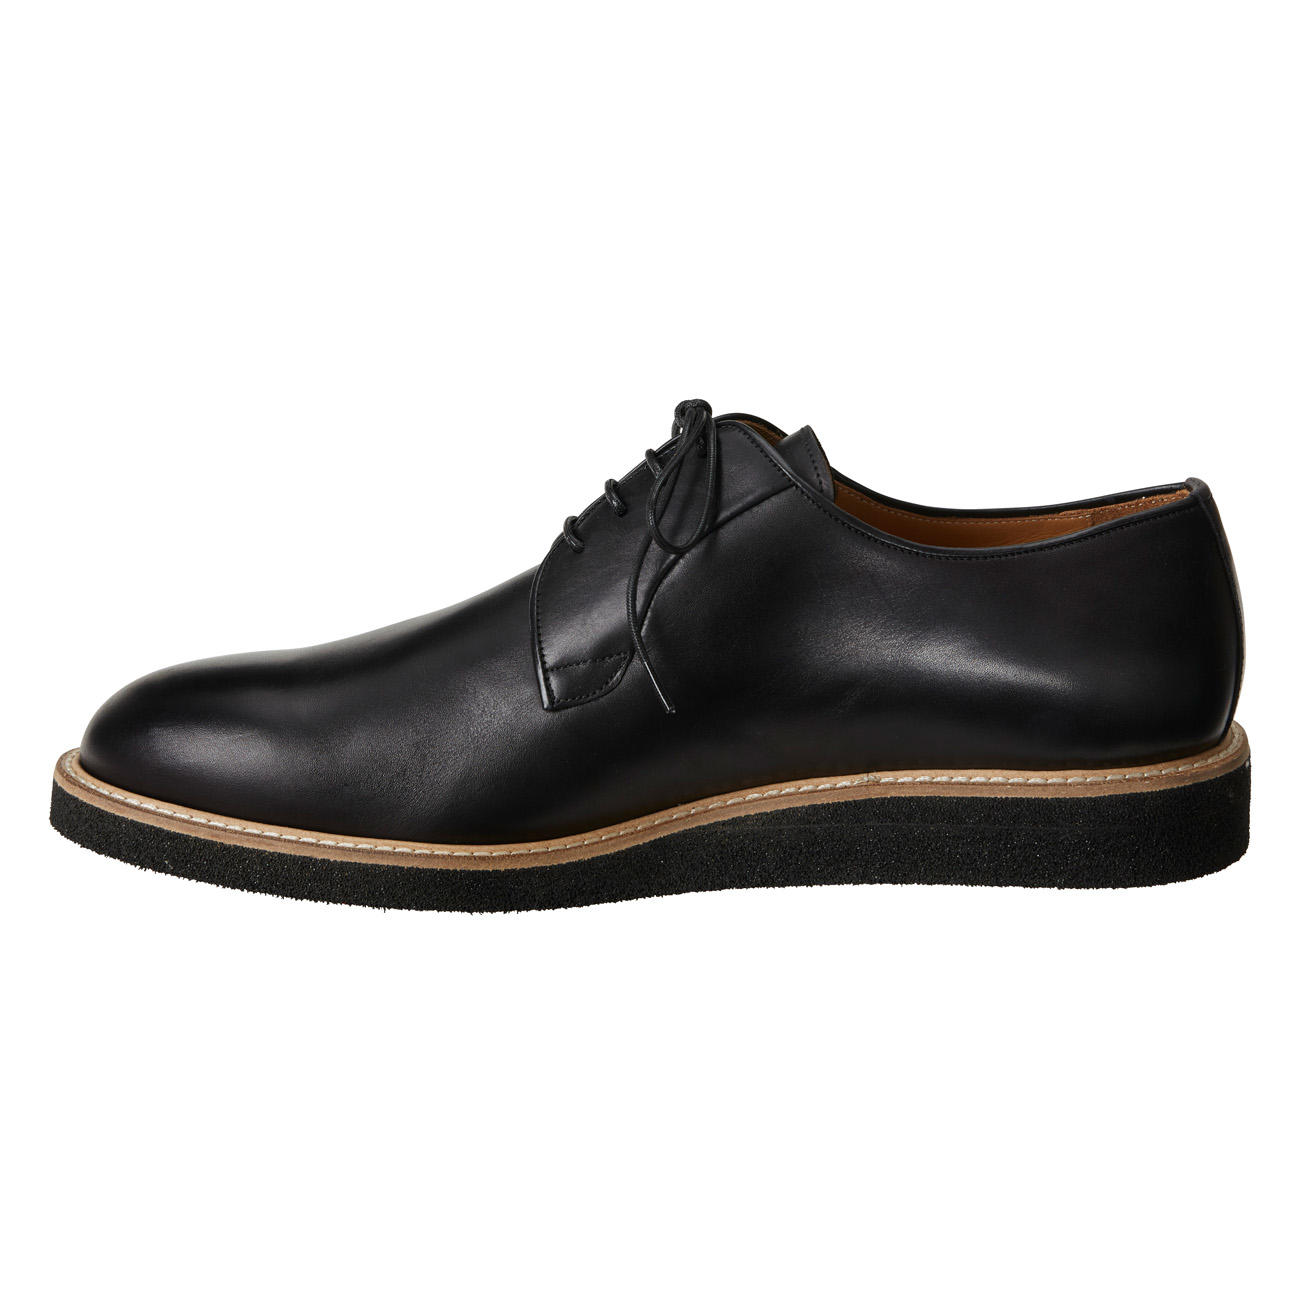 As formal as a traditional business shoe. Yet more comfortable, modern ...